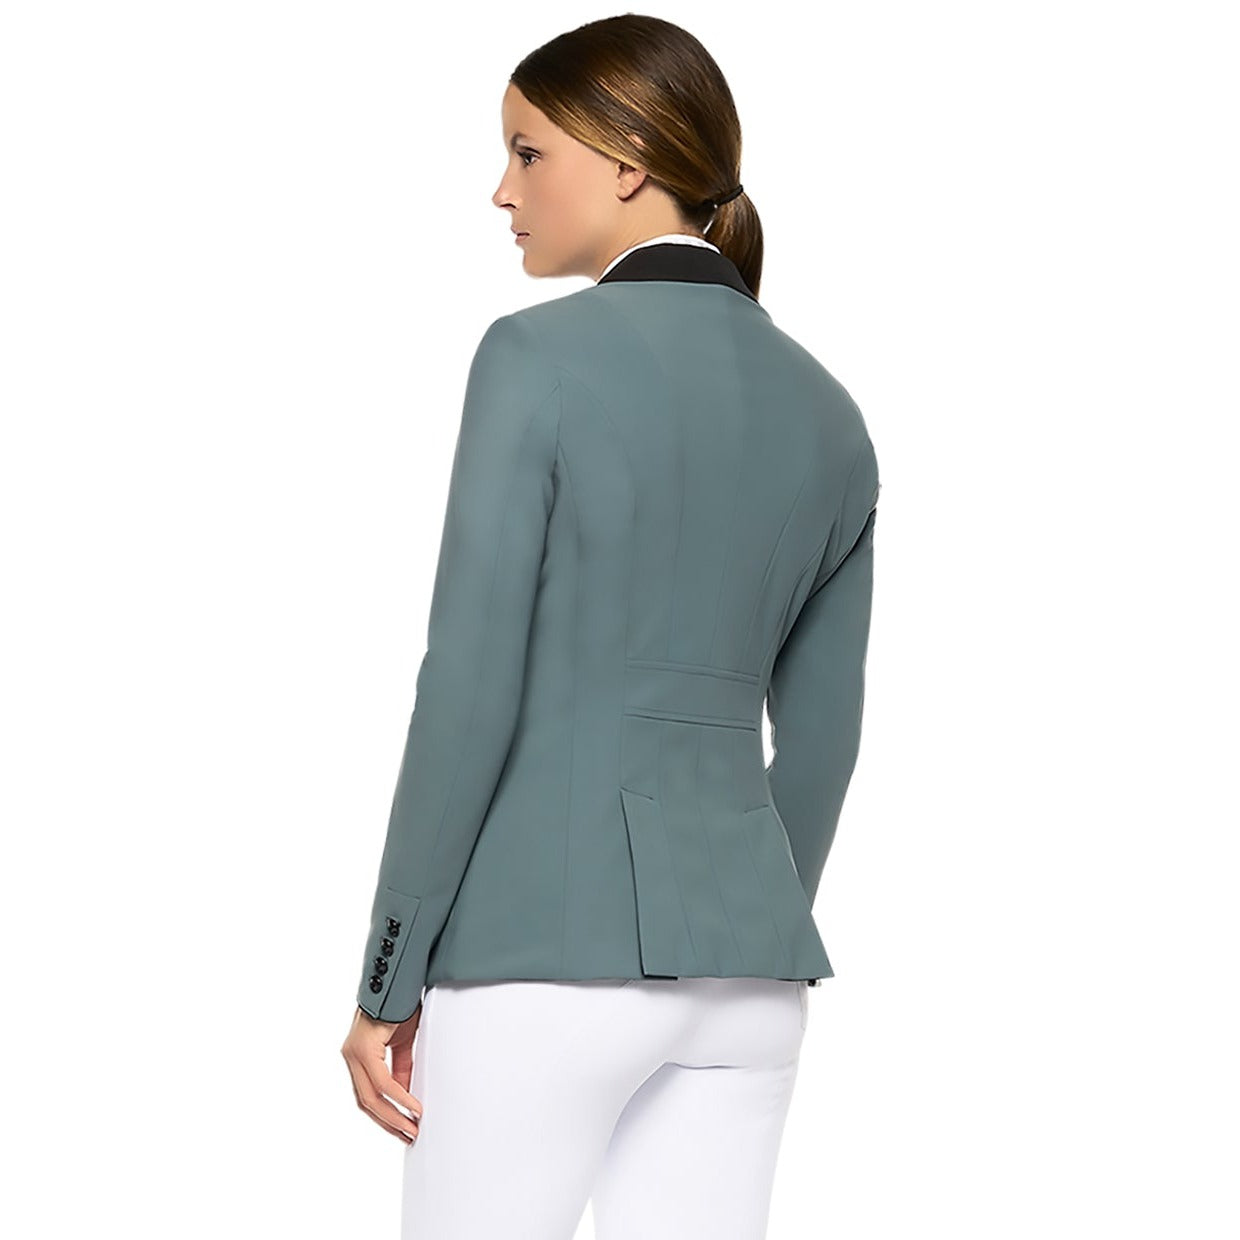 Cavalleria Toscana Ladies GP Riding Jacket- Petroleum-Trailrace Equestrian Outfitters-The Equestrian